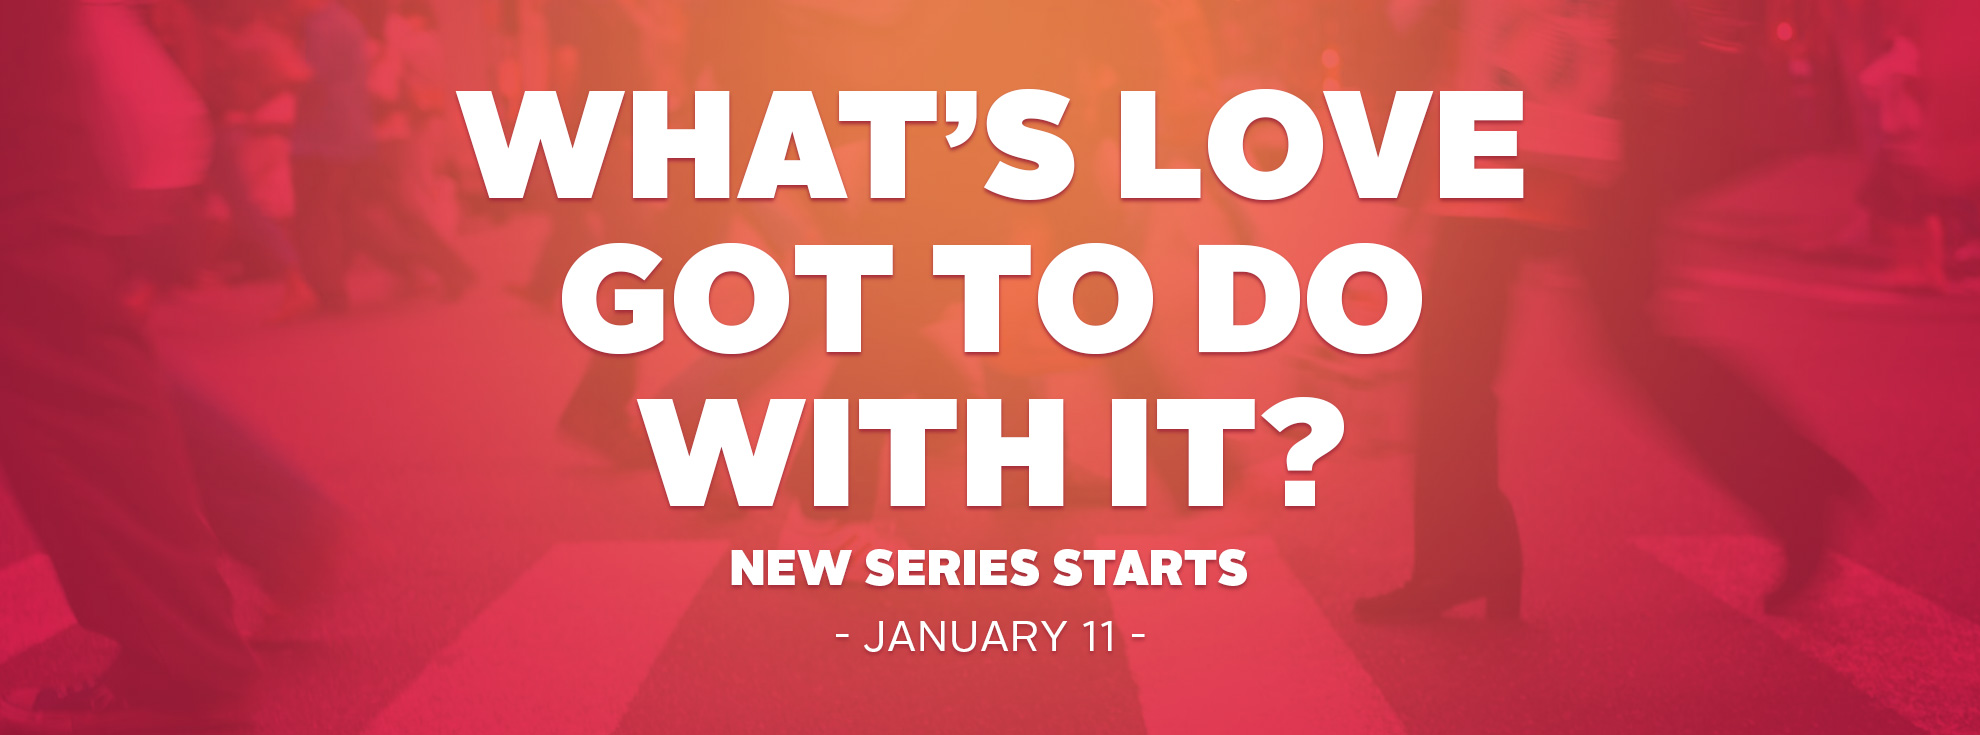 New Series: What’s Love Got To Do With It?